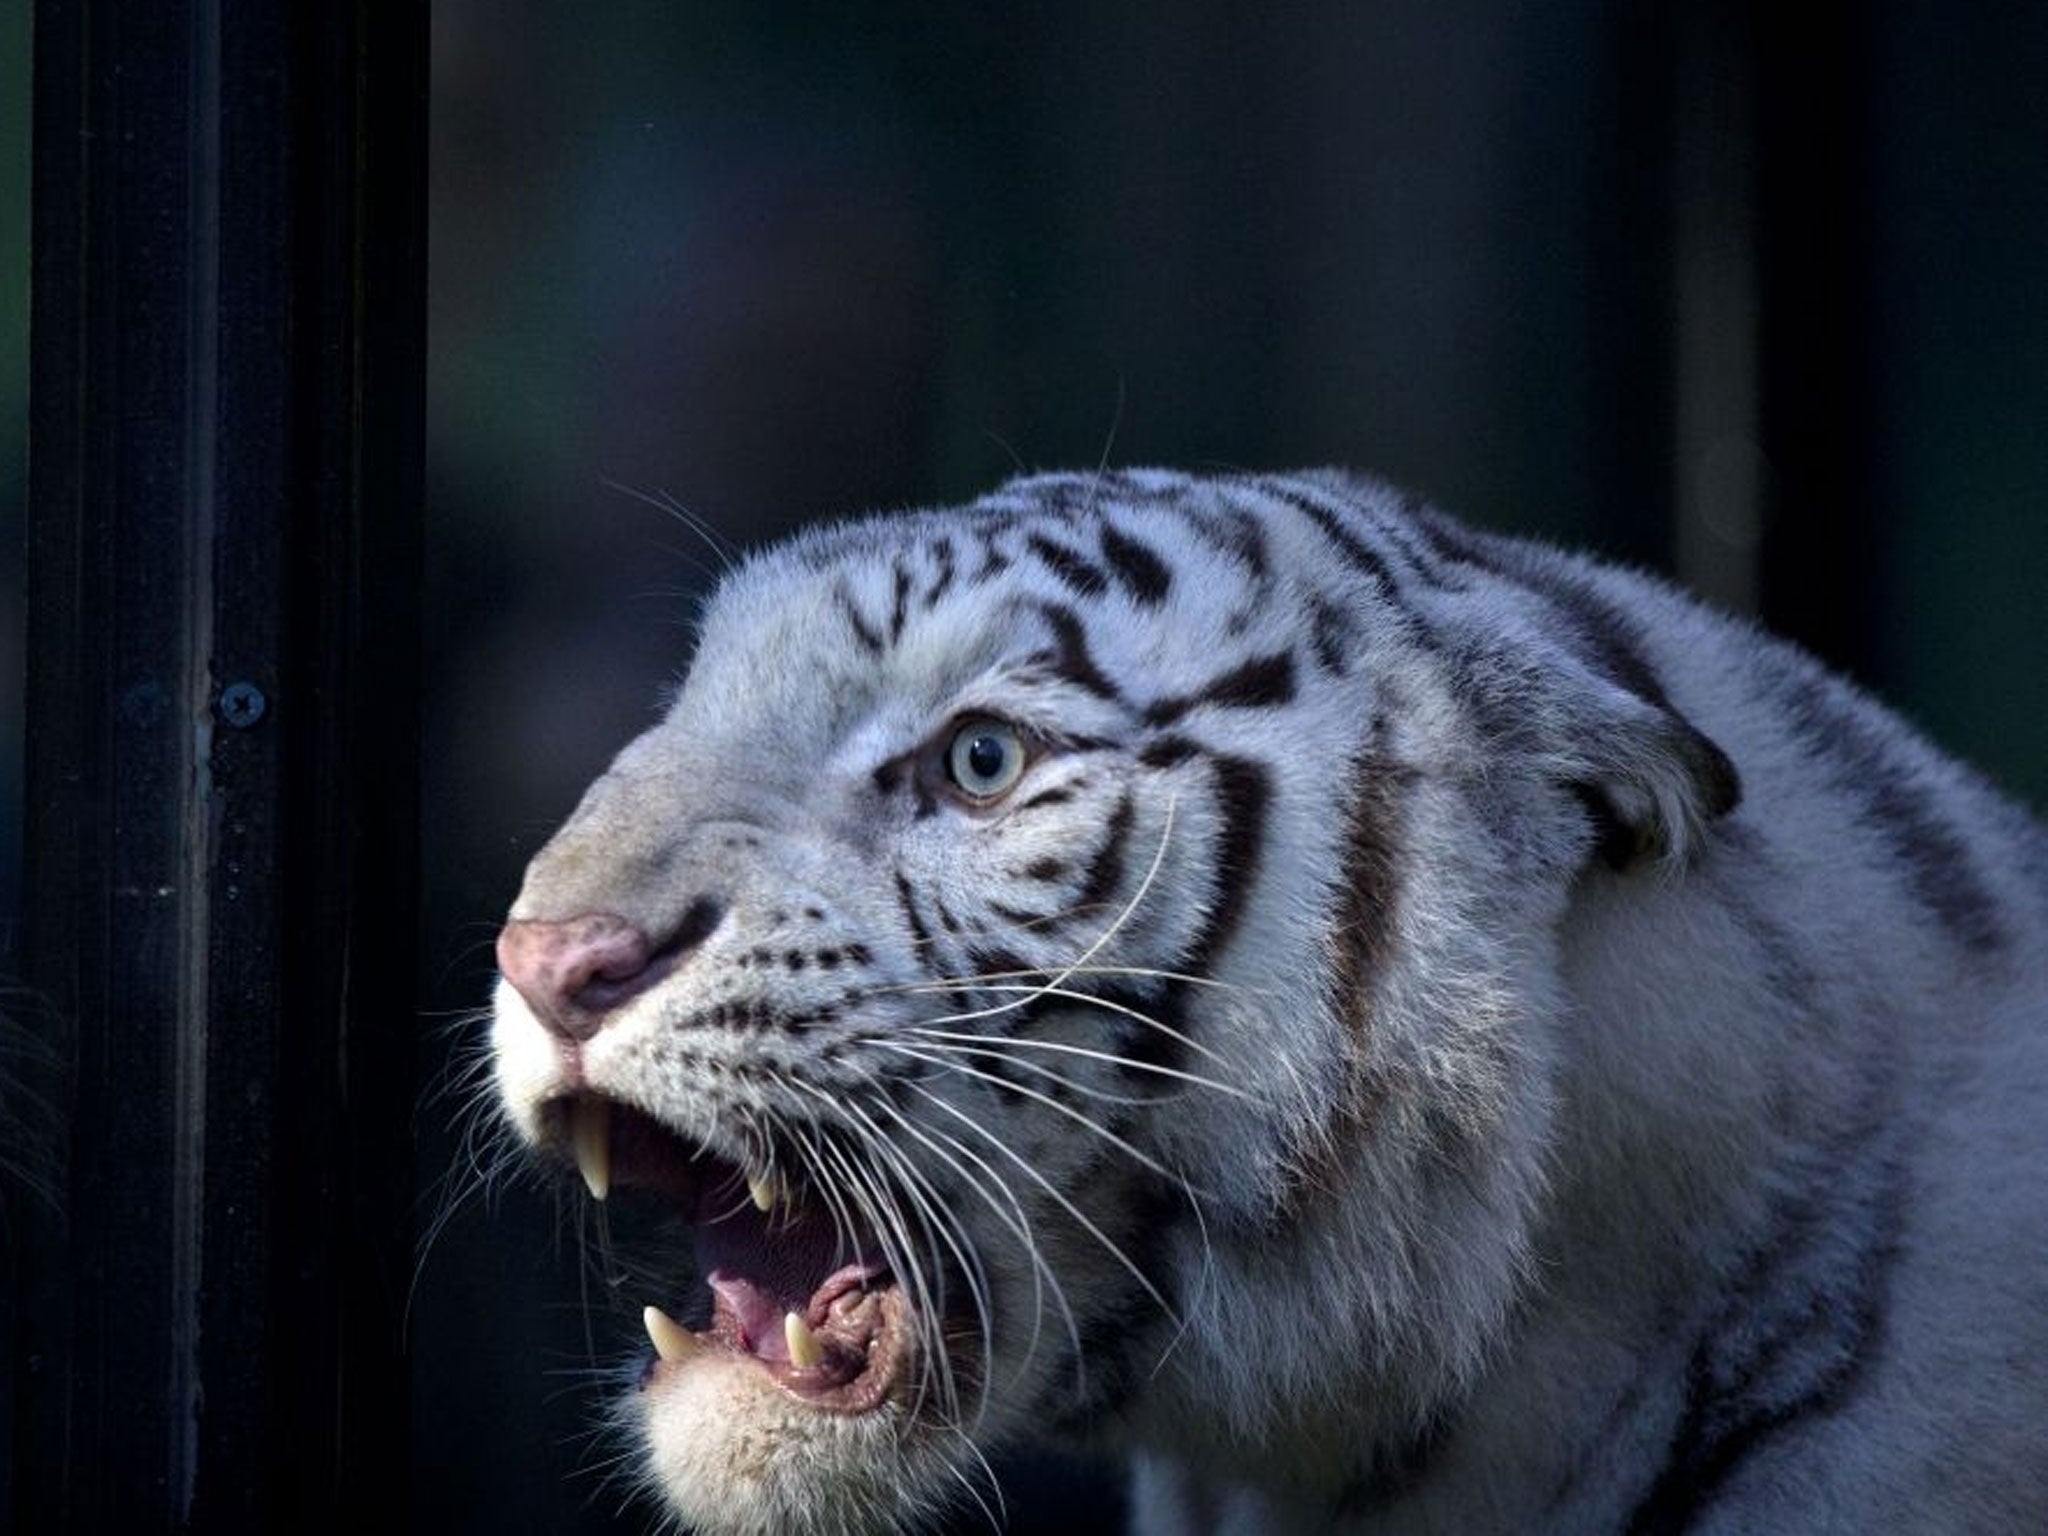 A white tiger like this has mauled a zookeeper to death in Japan.